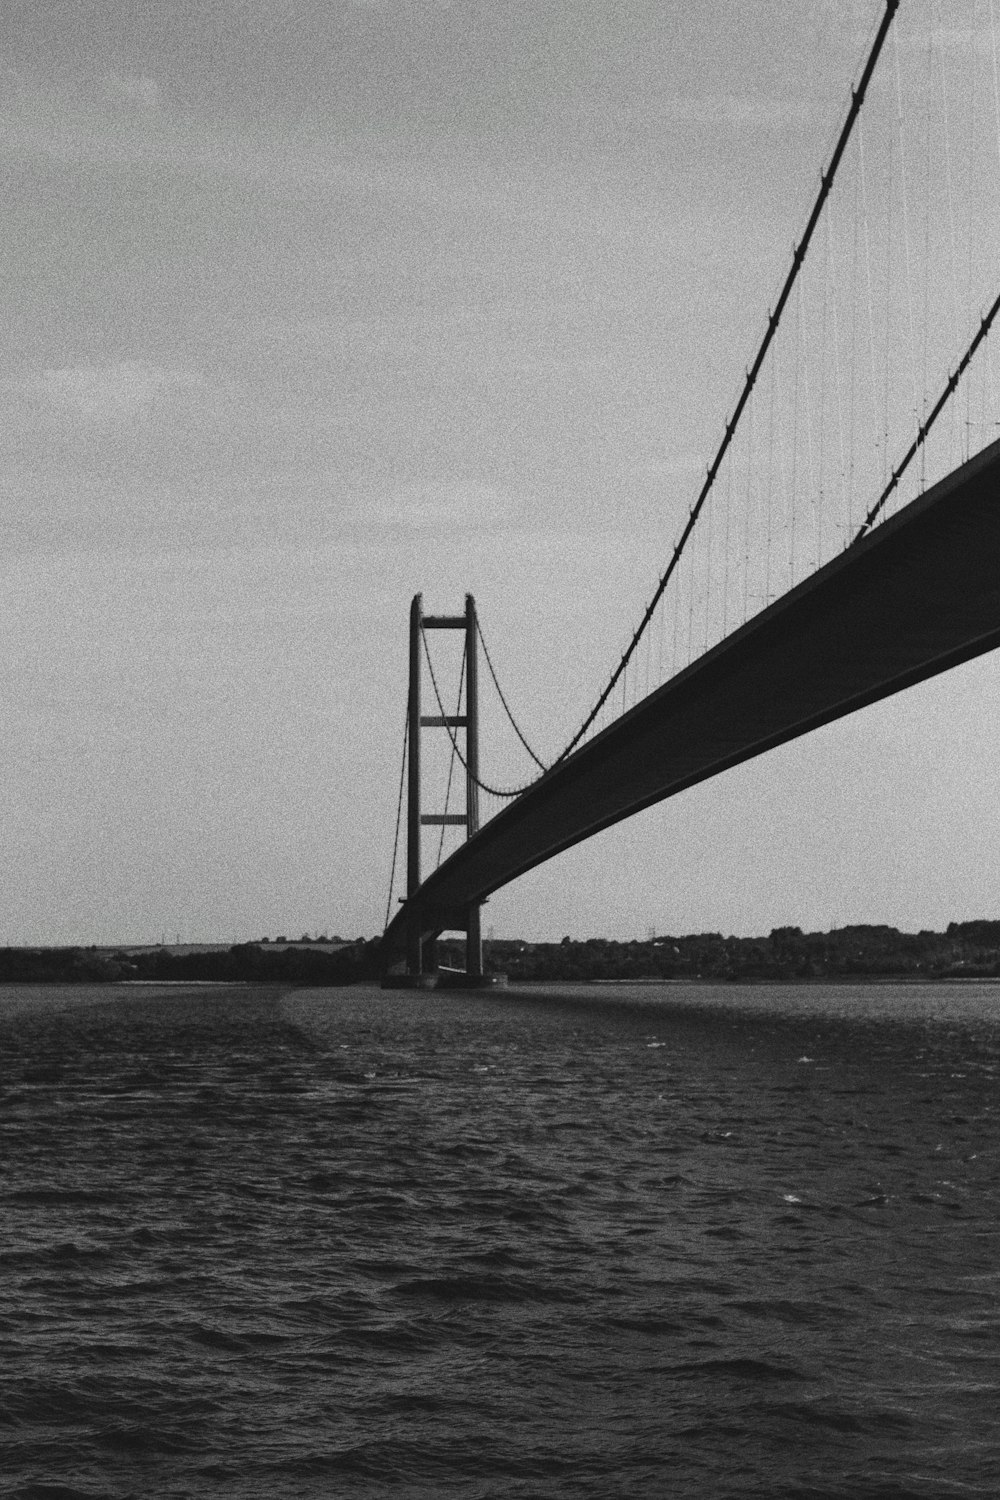 a black and white photo of a bridge over water